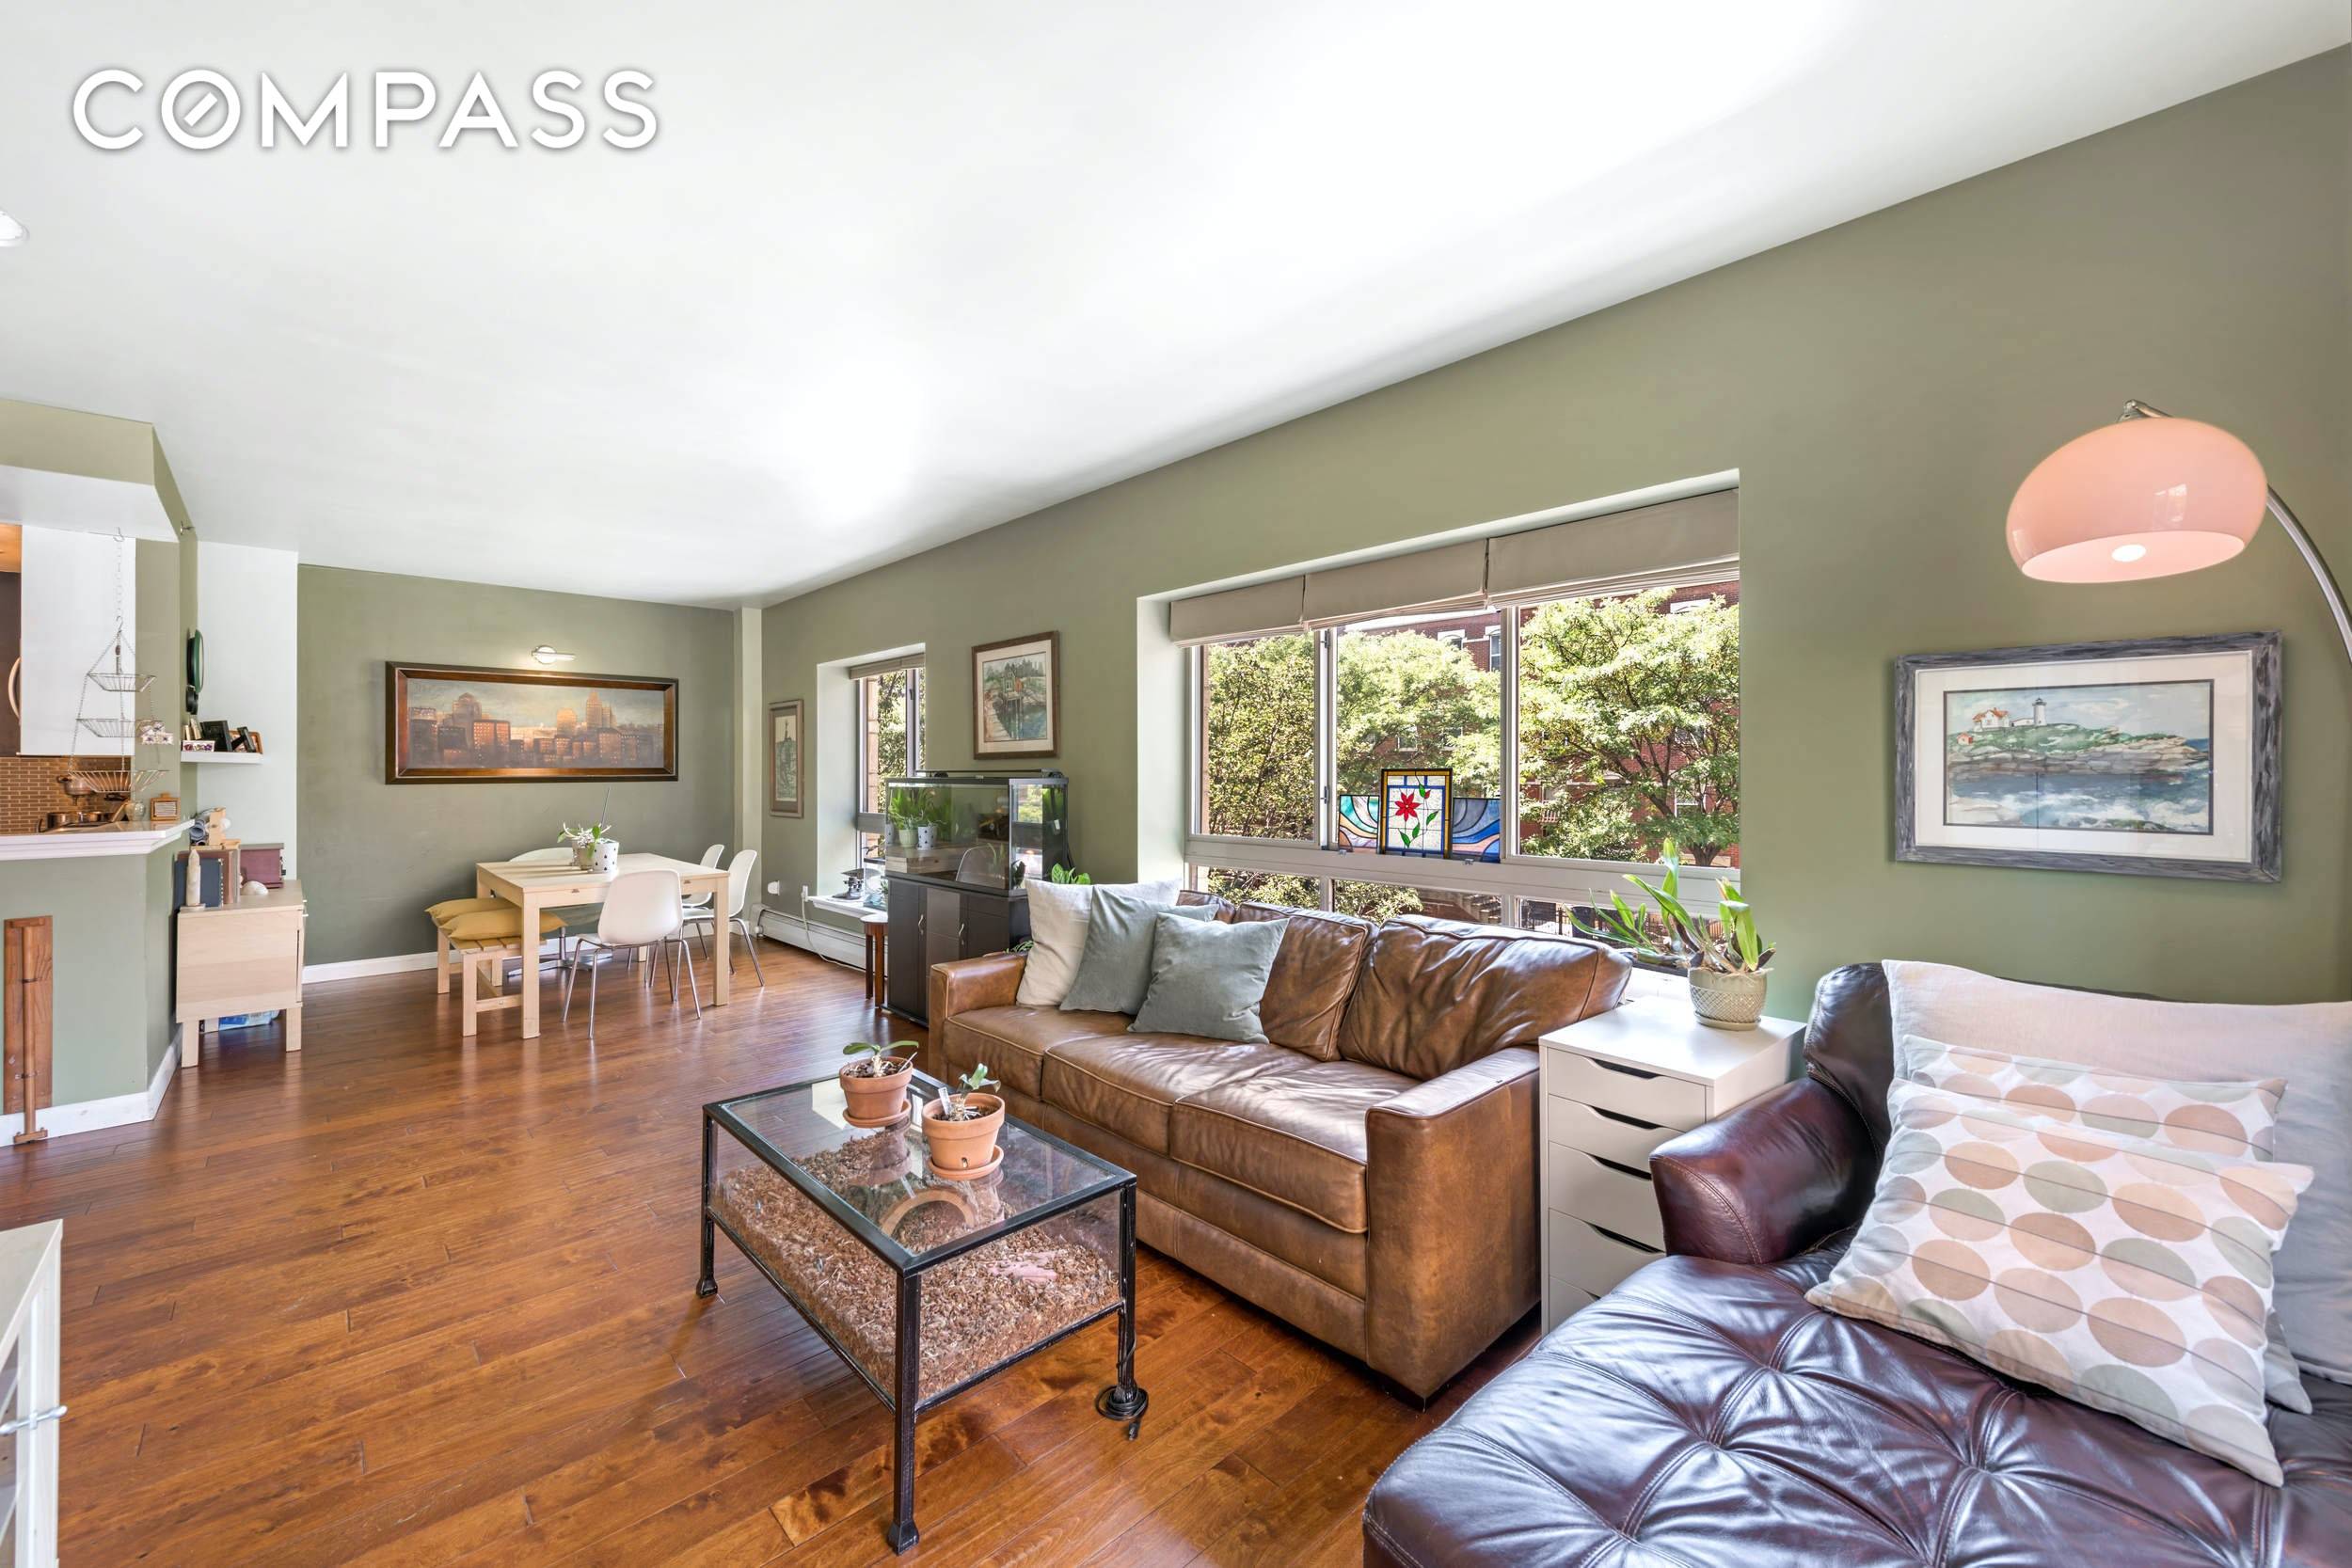 RARELY AVAILABLE TRUE 3 BEDROOM Floor to ceiling windows distinguish this 3 bedroom 2 bath from others in Madison Court which allow glorious sunlight to flood this sprawling corner home.